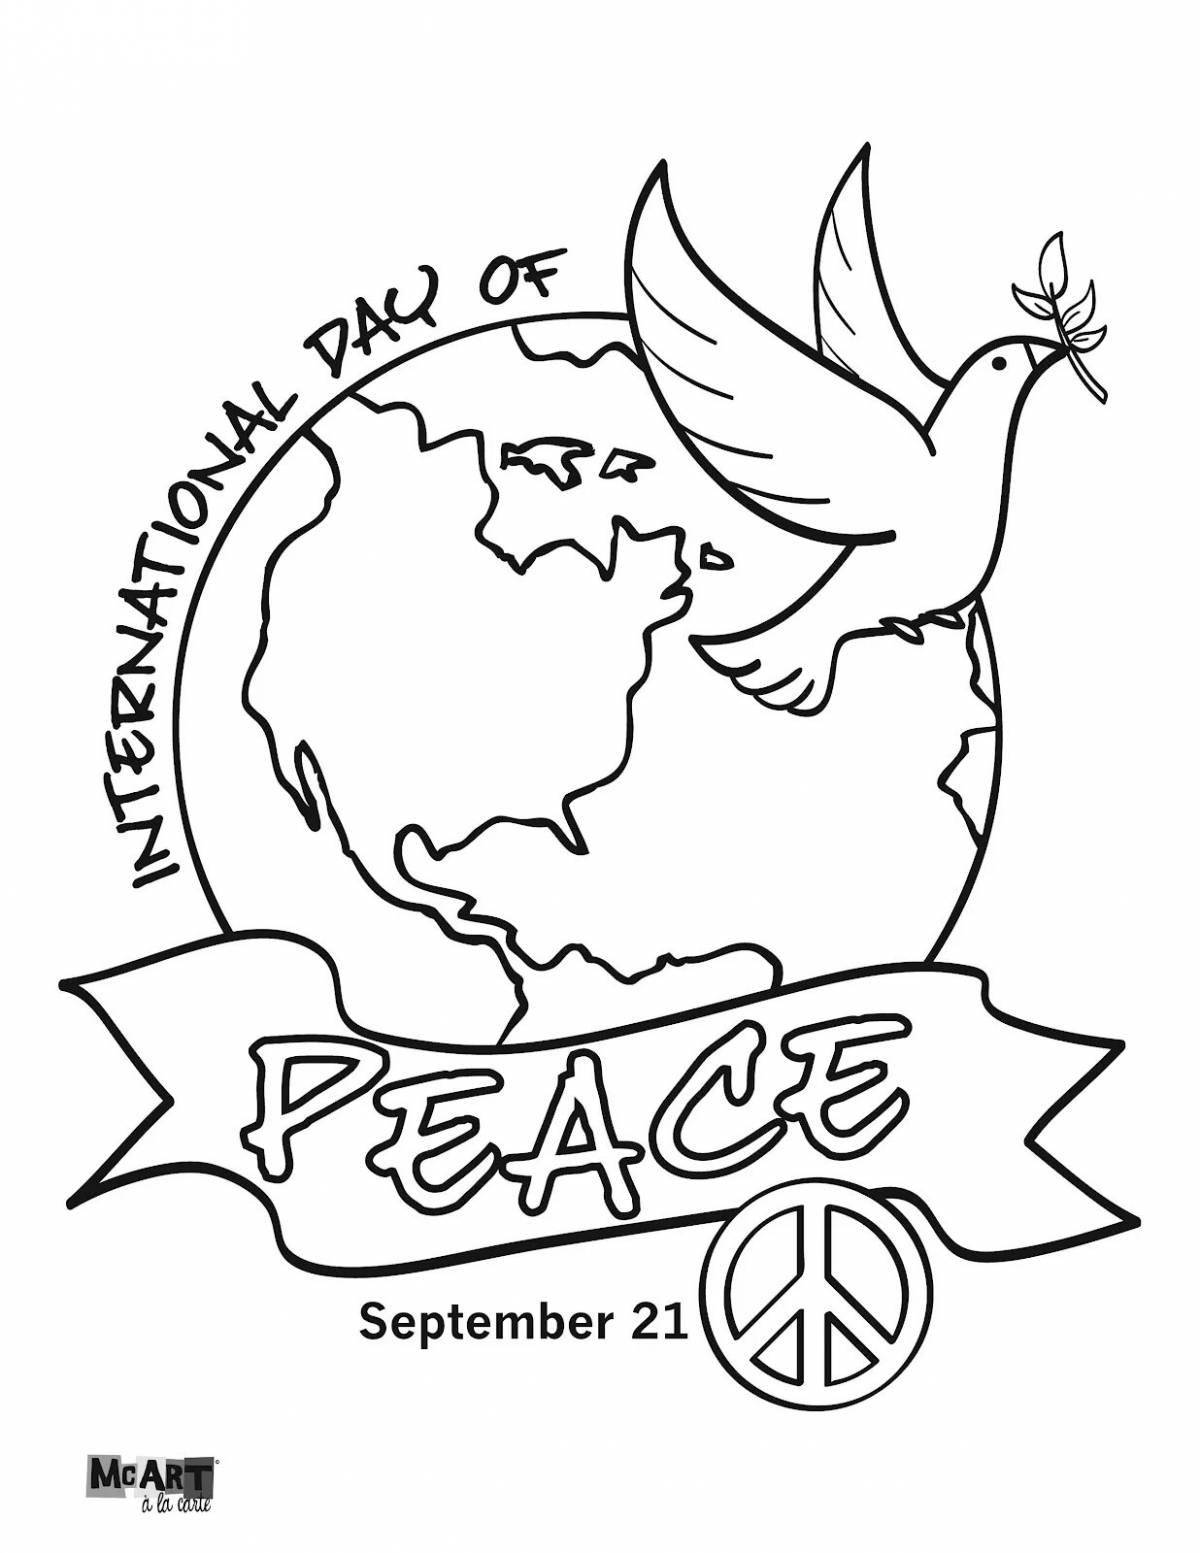 Colorful world peace no war coloring page